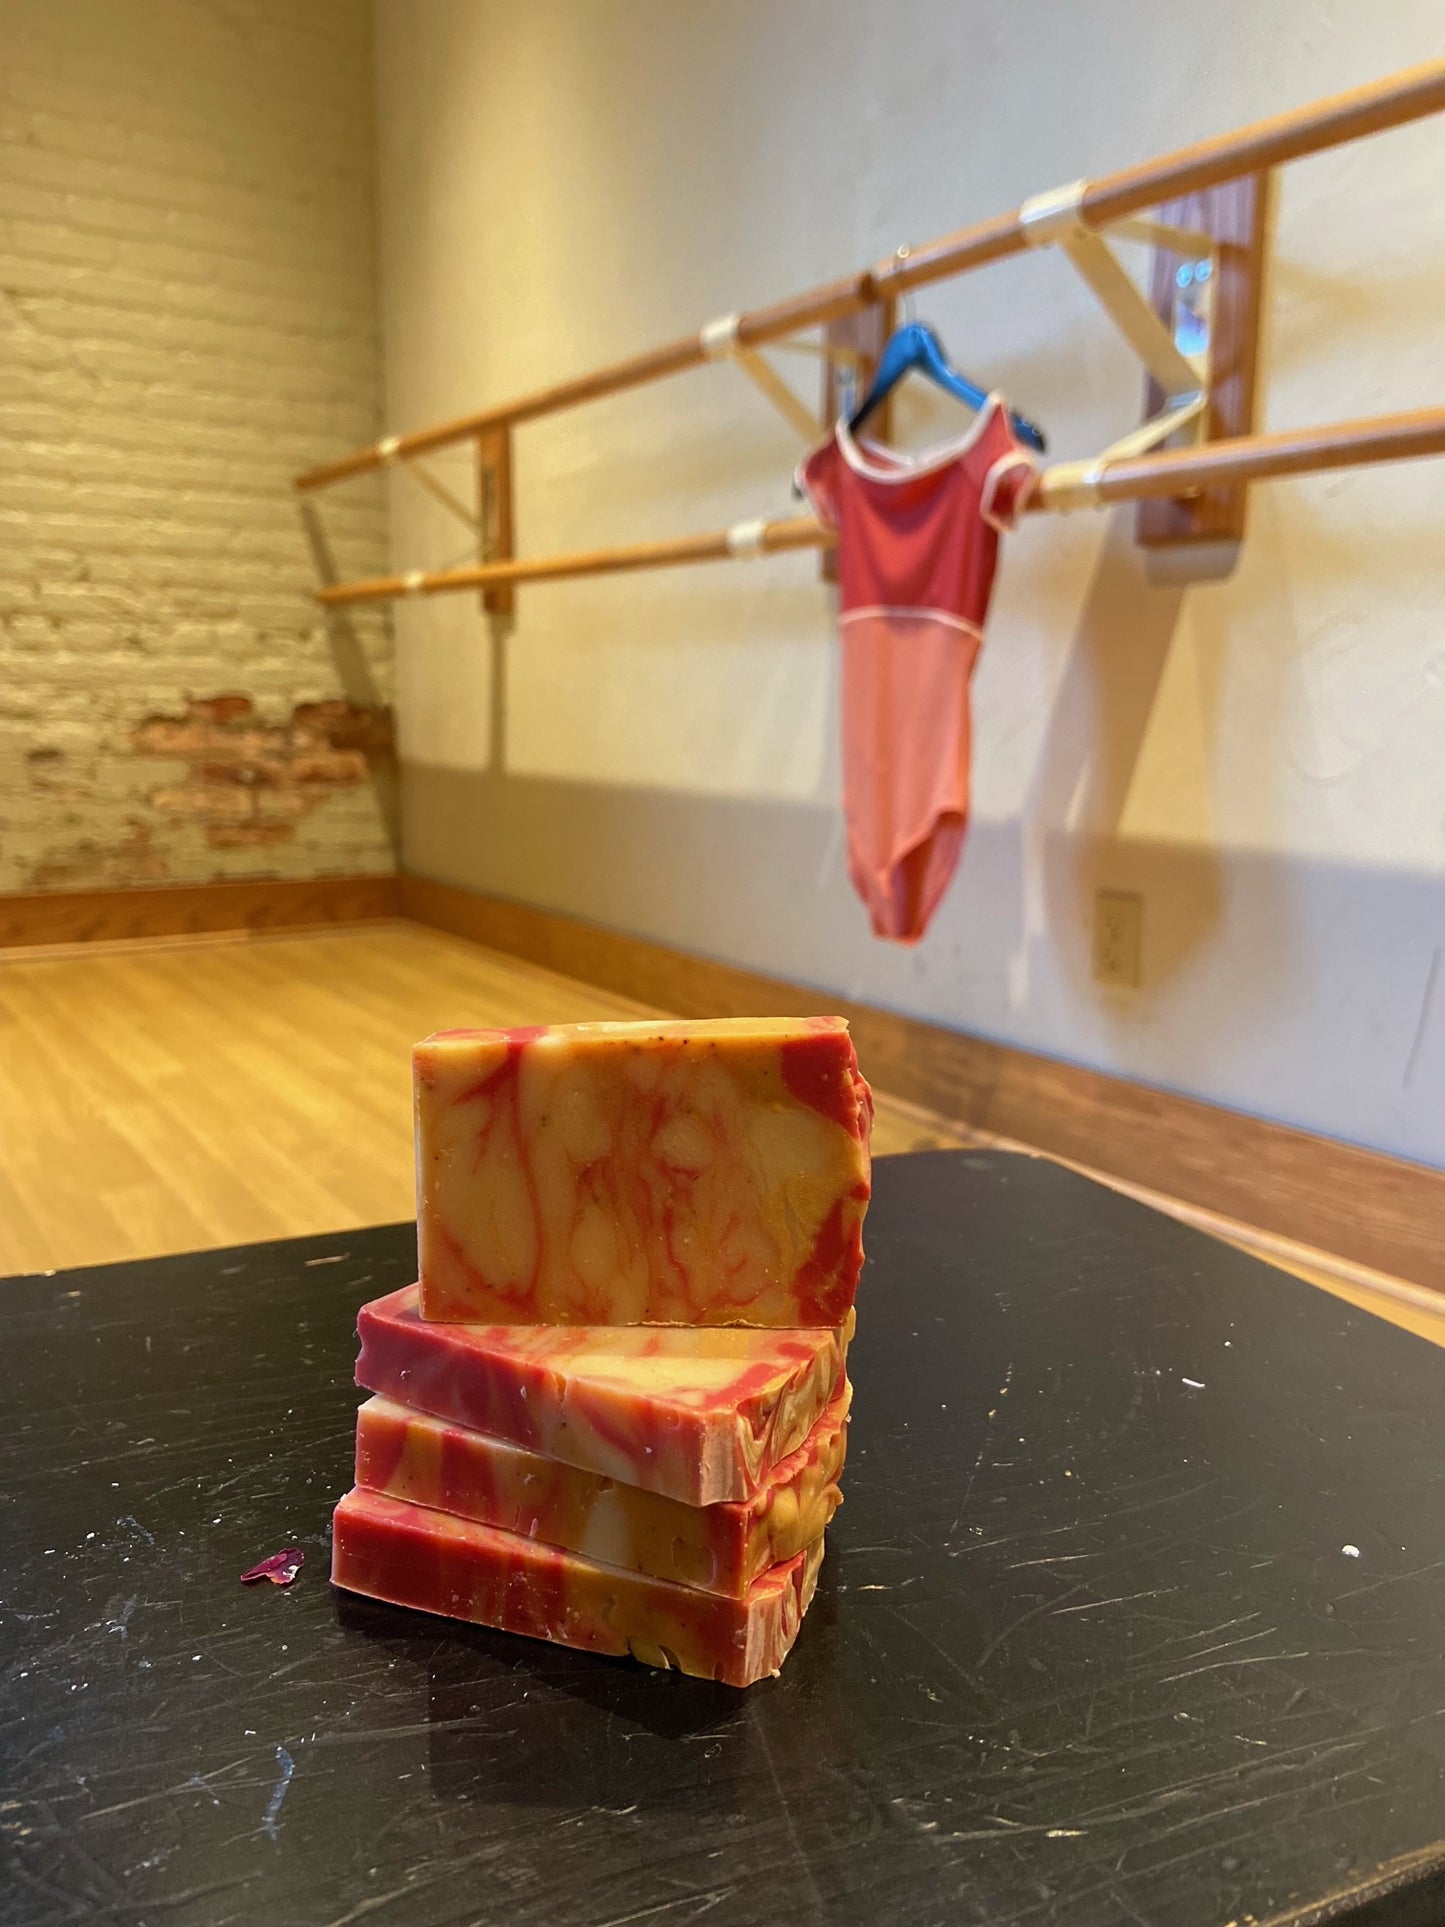 Locally Made Soaps - Dance Inspired